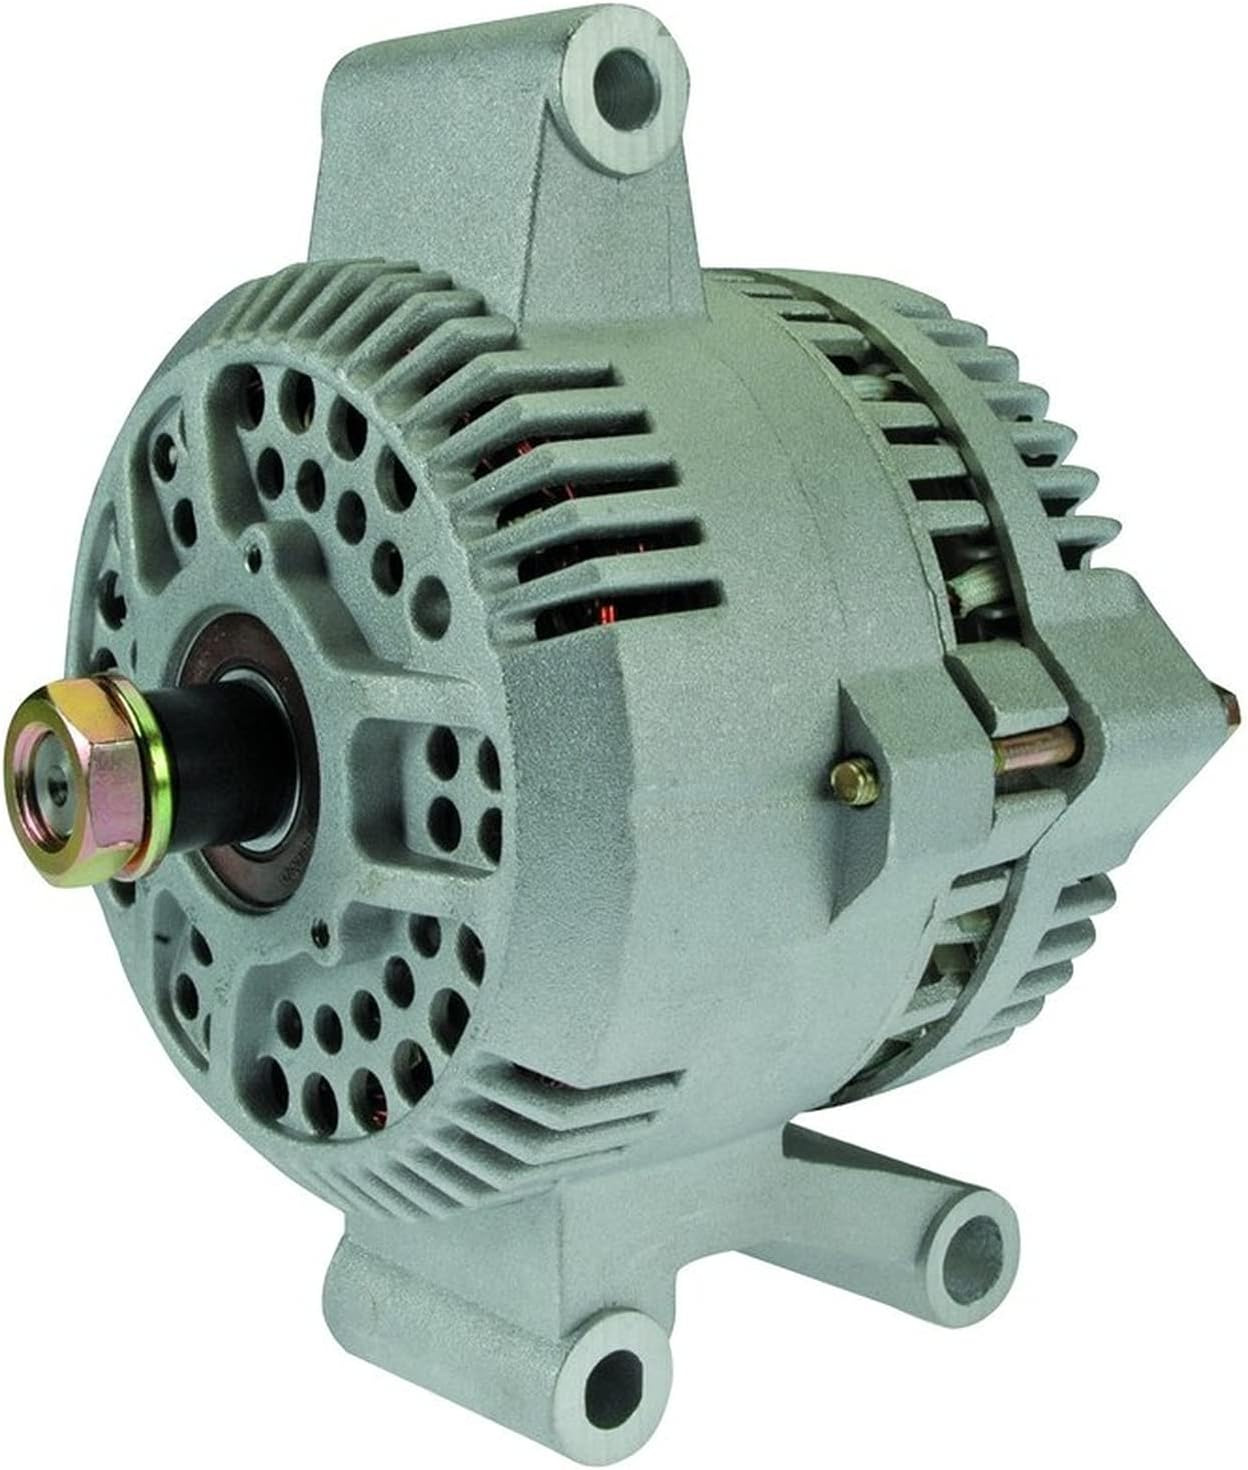 New Alternator Fits Compatible with Mercury Mazda No Pulley 4.0 3.0 4.2 V6 5.8 5